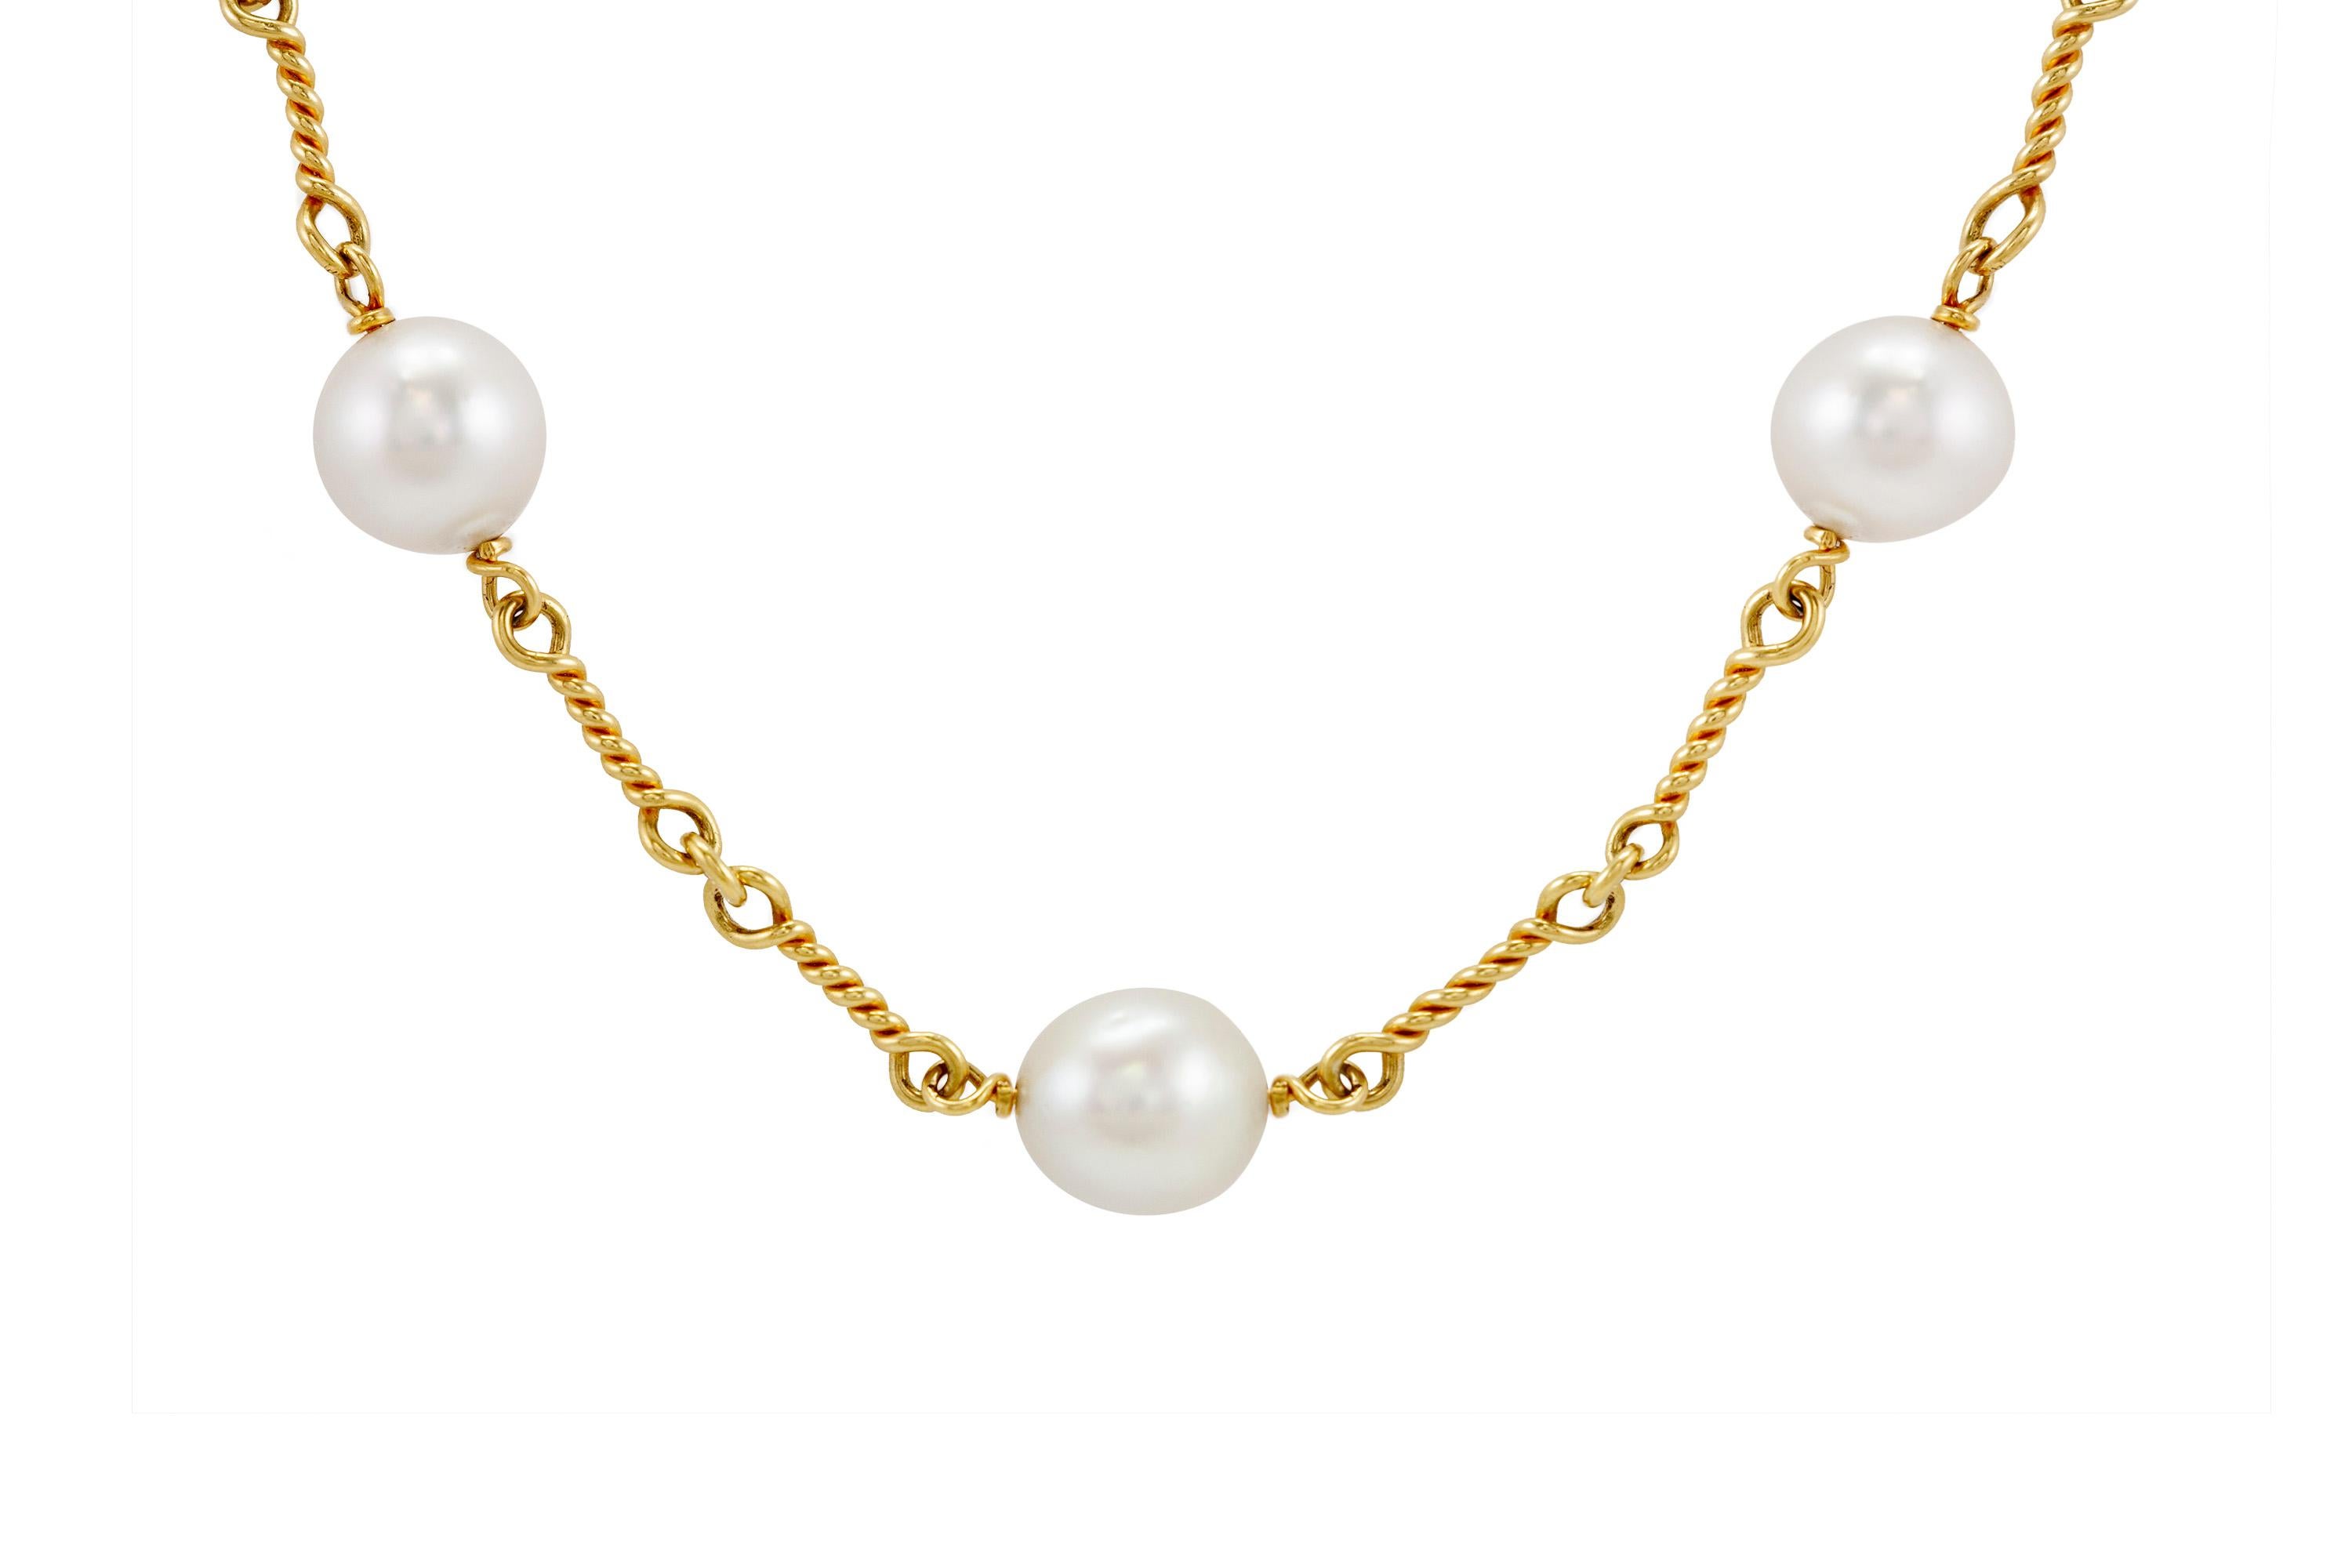 The necklace is finely crafted 18k yellow gold with 7 pearls average 14 mm. 
Circa 2000.